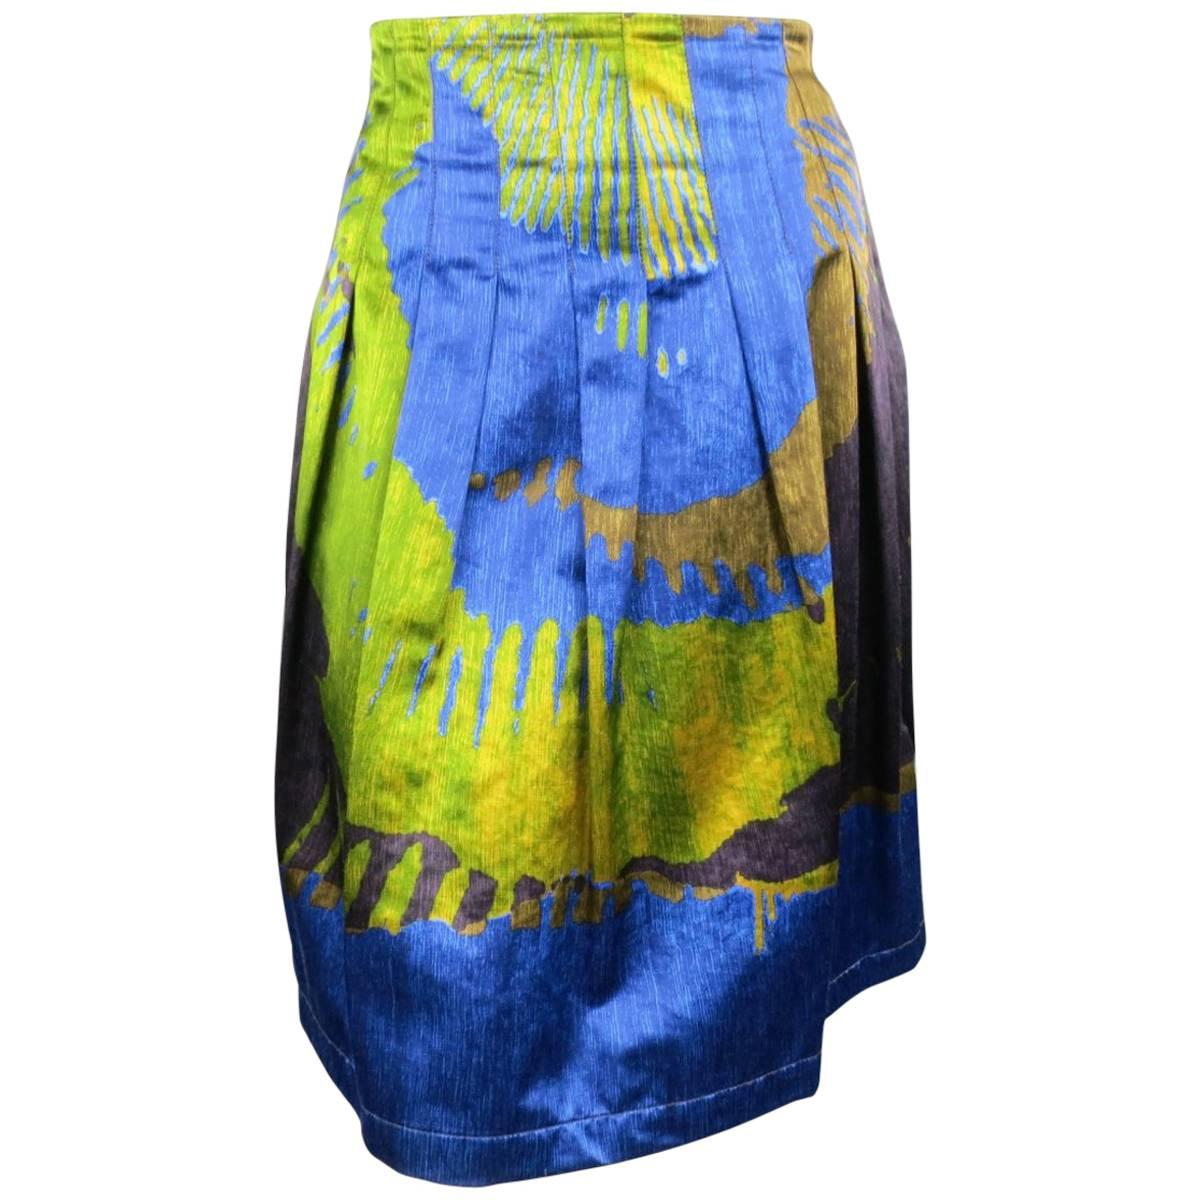 ETRO Skirt - Size 4 - Green & Blue Abstract Print Satin Pleated A Line Skirt